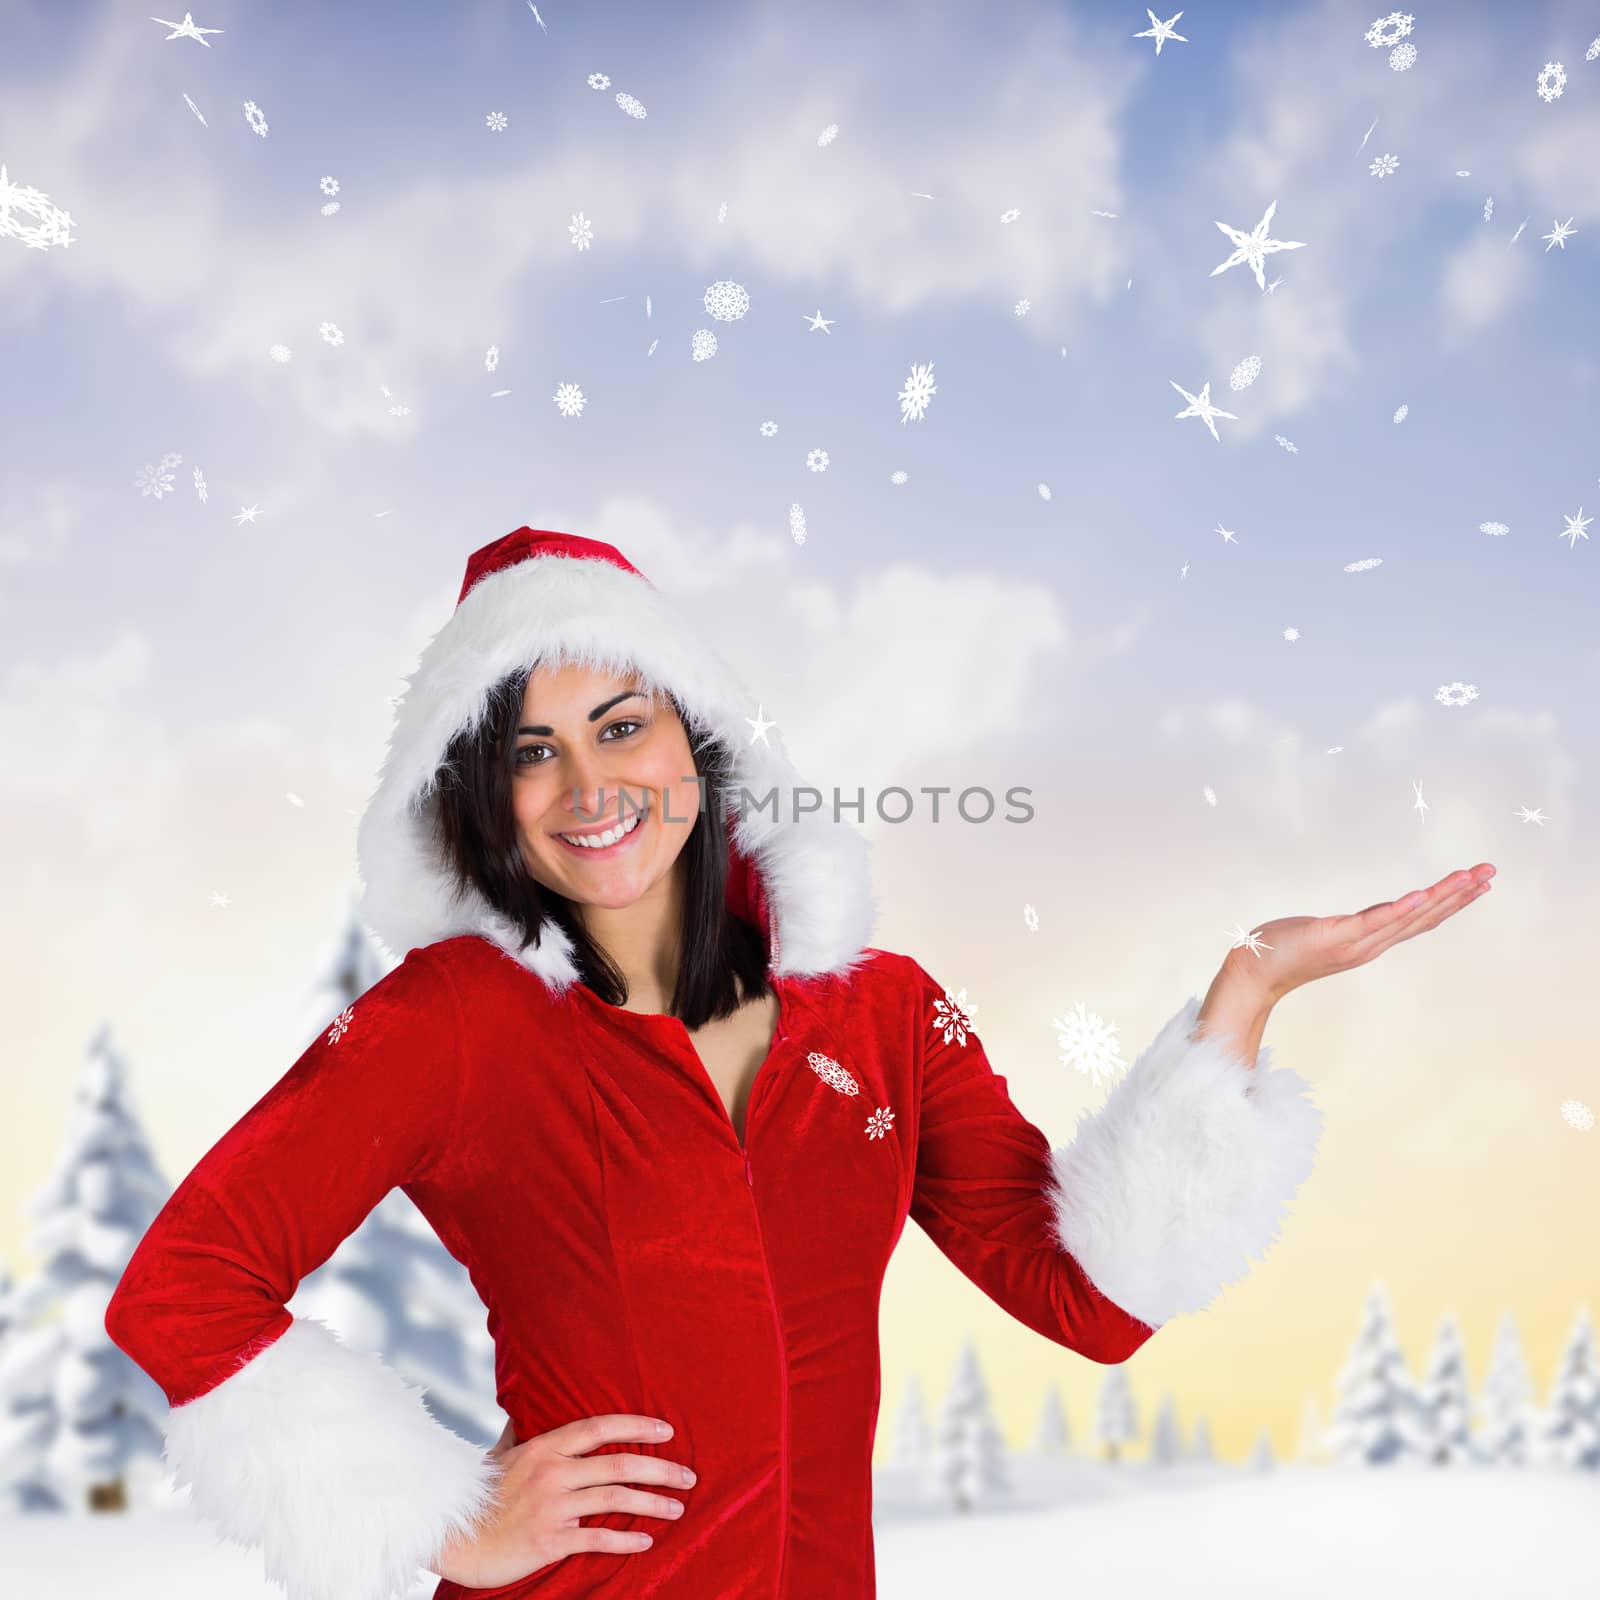 Pretty girl presenting in santa outfit against snowy landscape with fir trees